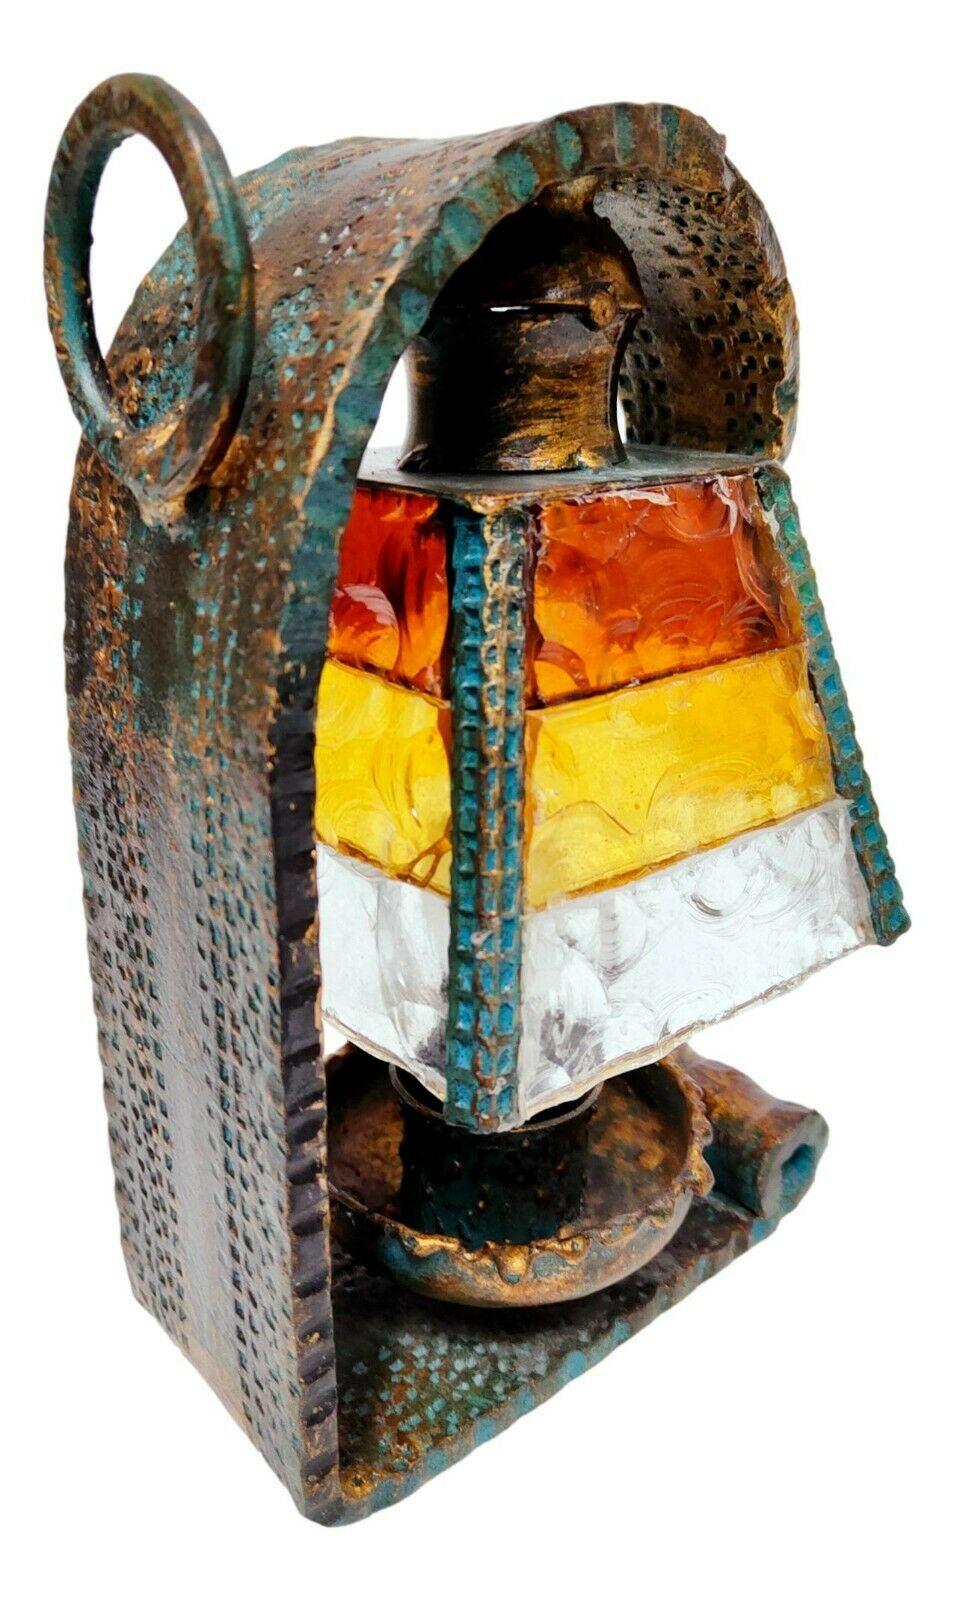 Italian Brutalist Table Lamp, Murano Glass and Hammered Metal, 1970s For Sale